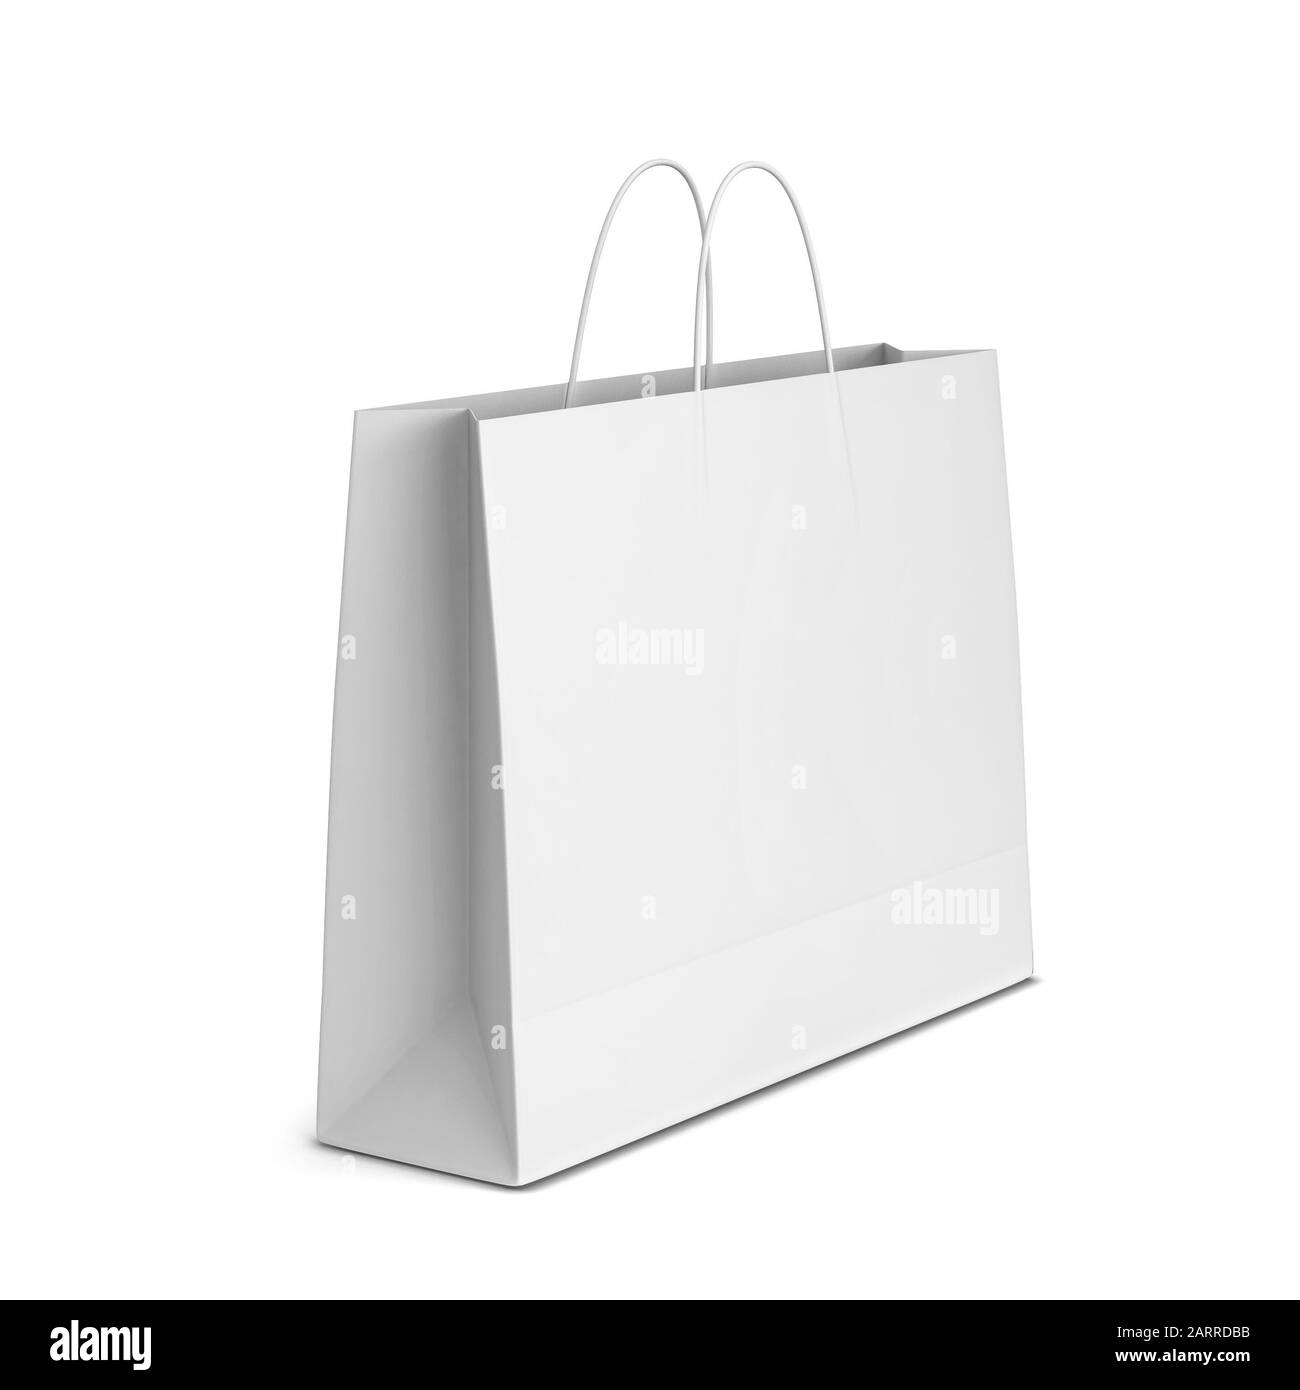 Premium PSD  Set of colorful empty shopping bags isolated in white  background minimalist concept 3d render